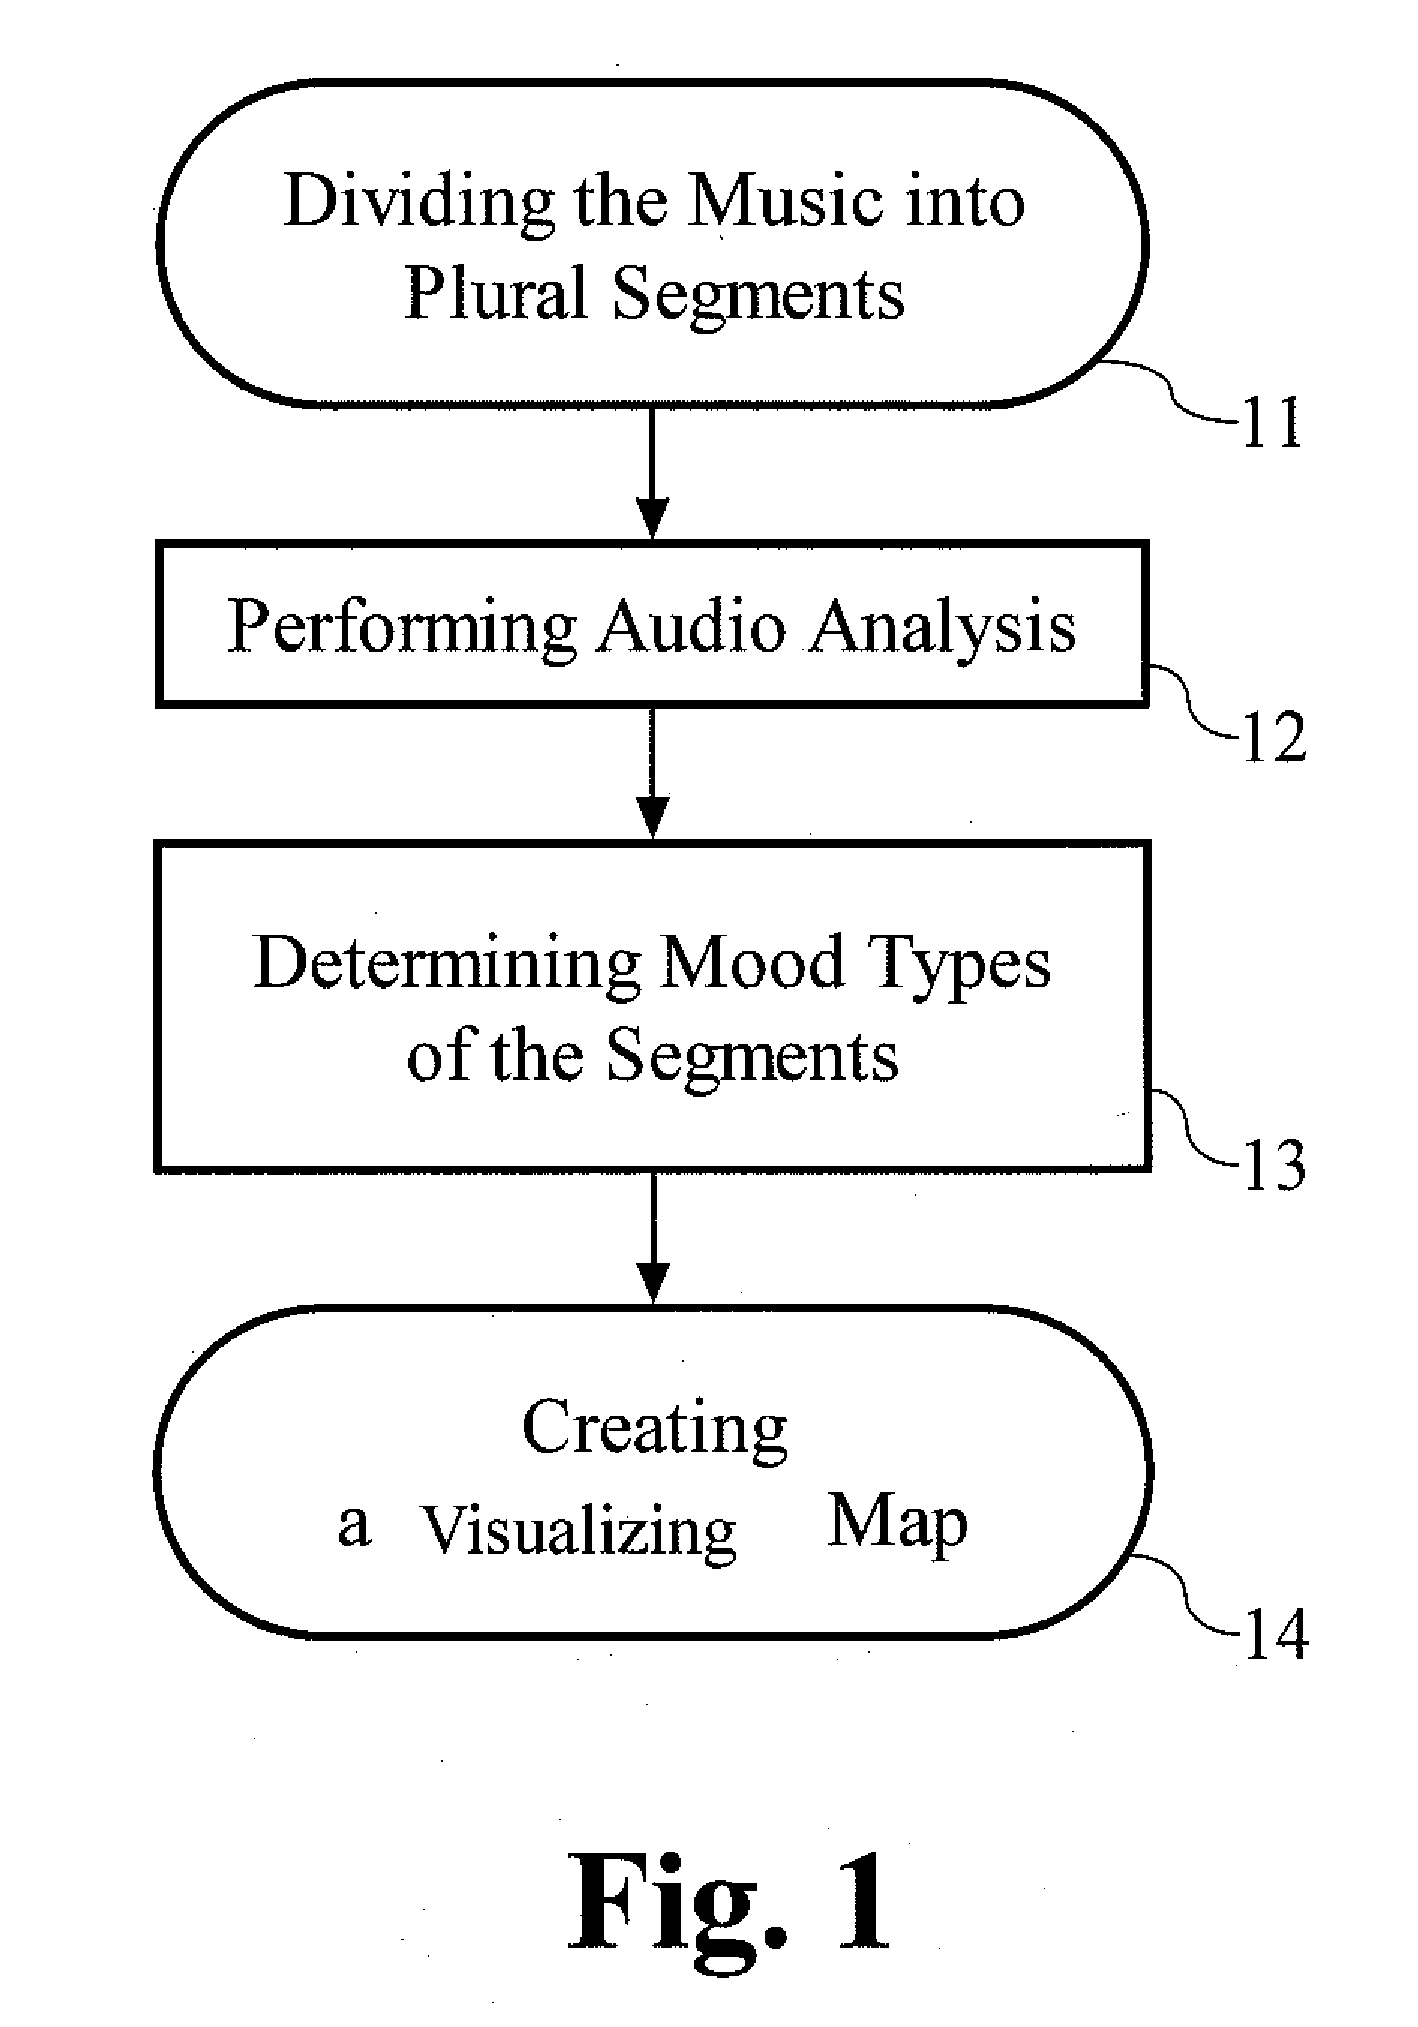 Method for generating a visualizing map of music